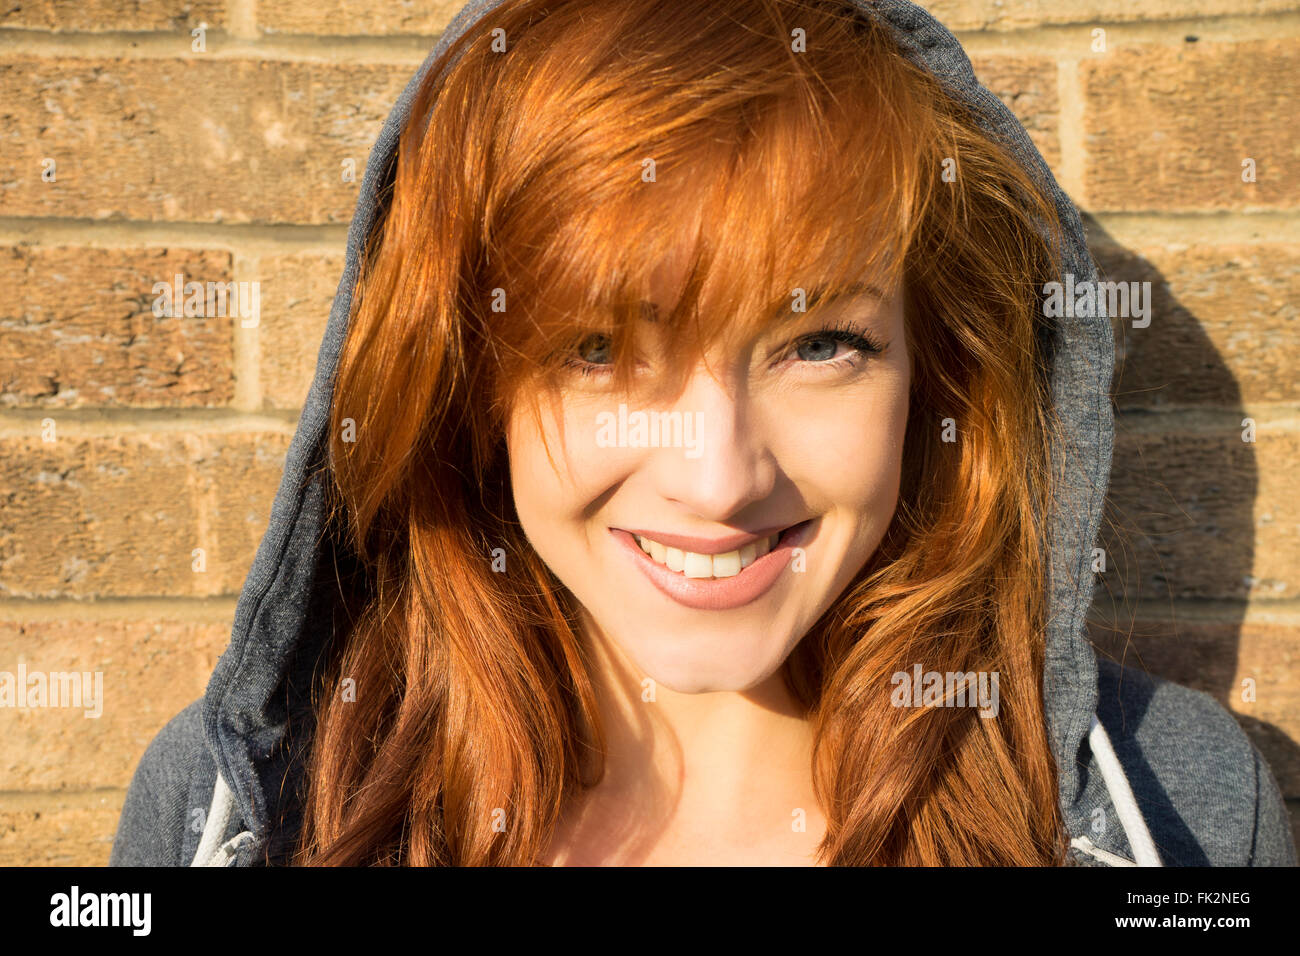 Head shot of a beautiful young female model with red hair and blue eyes Stock Photo